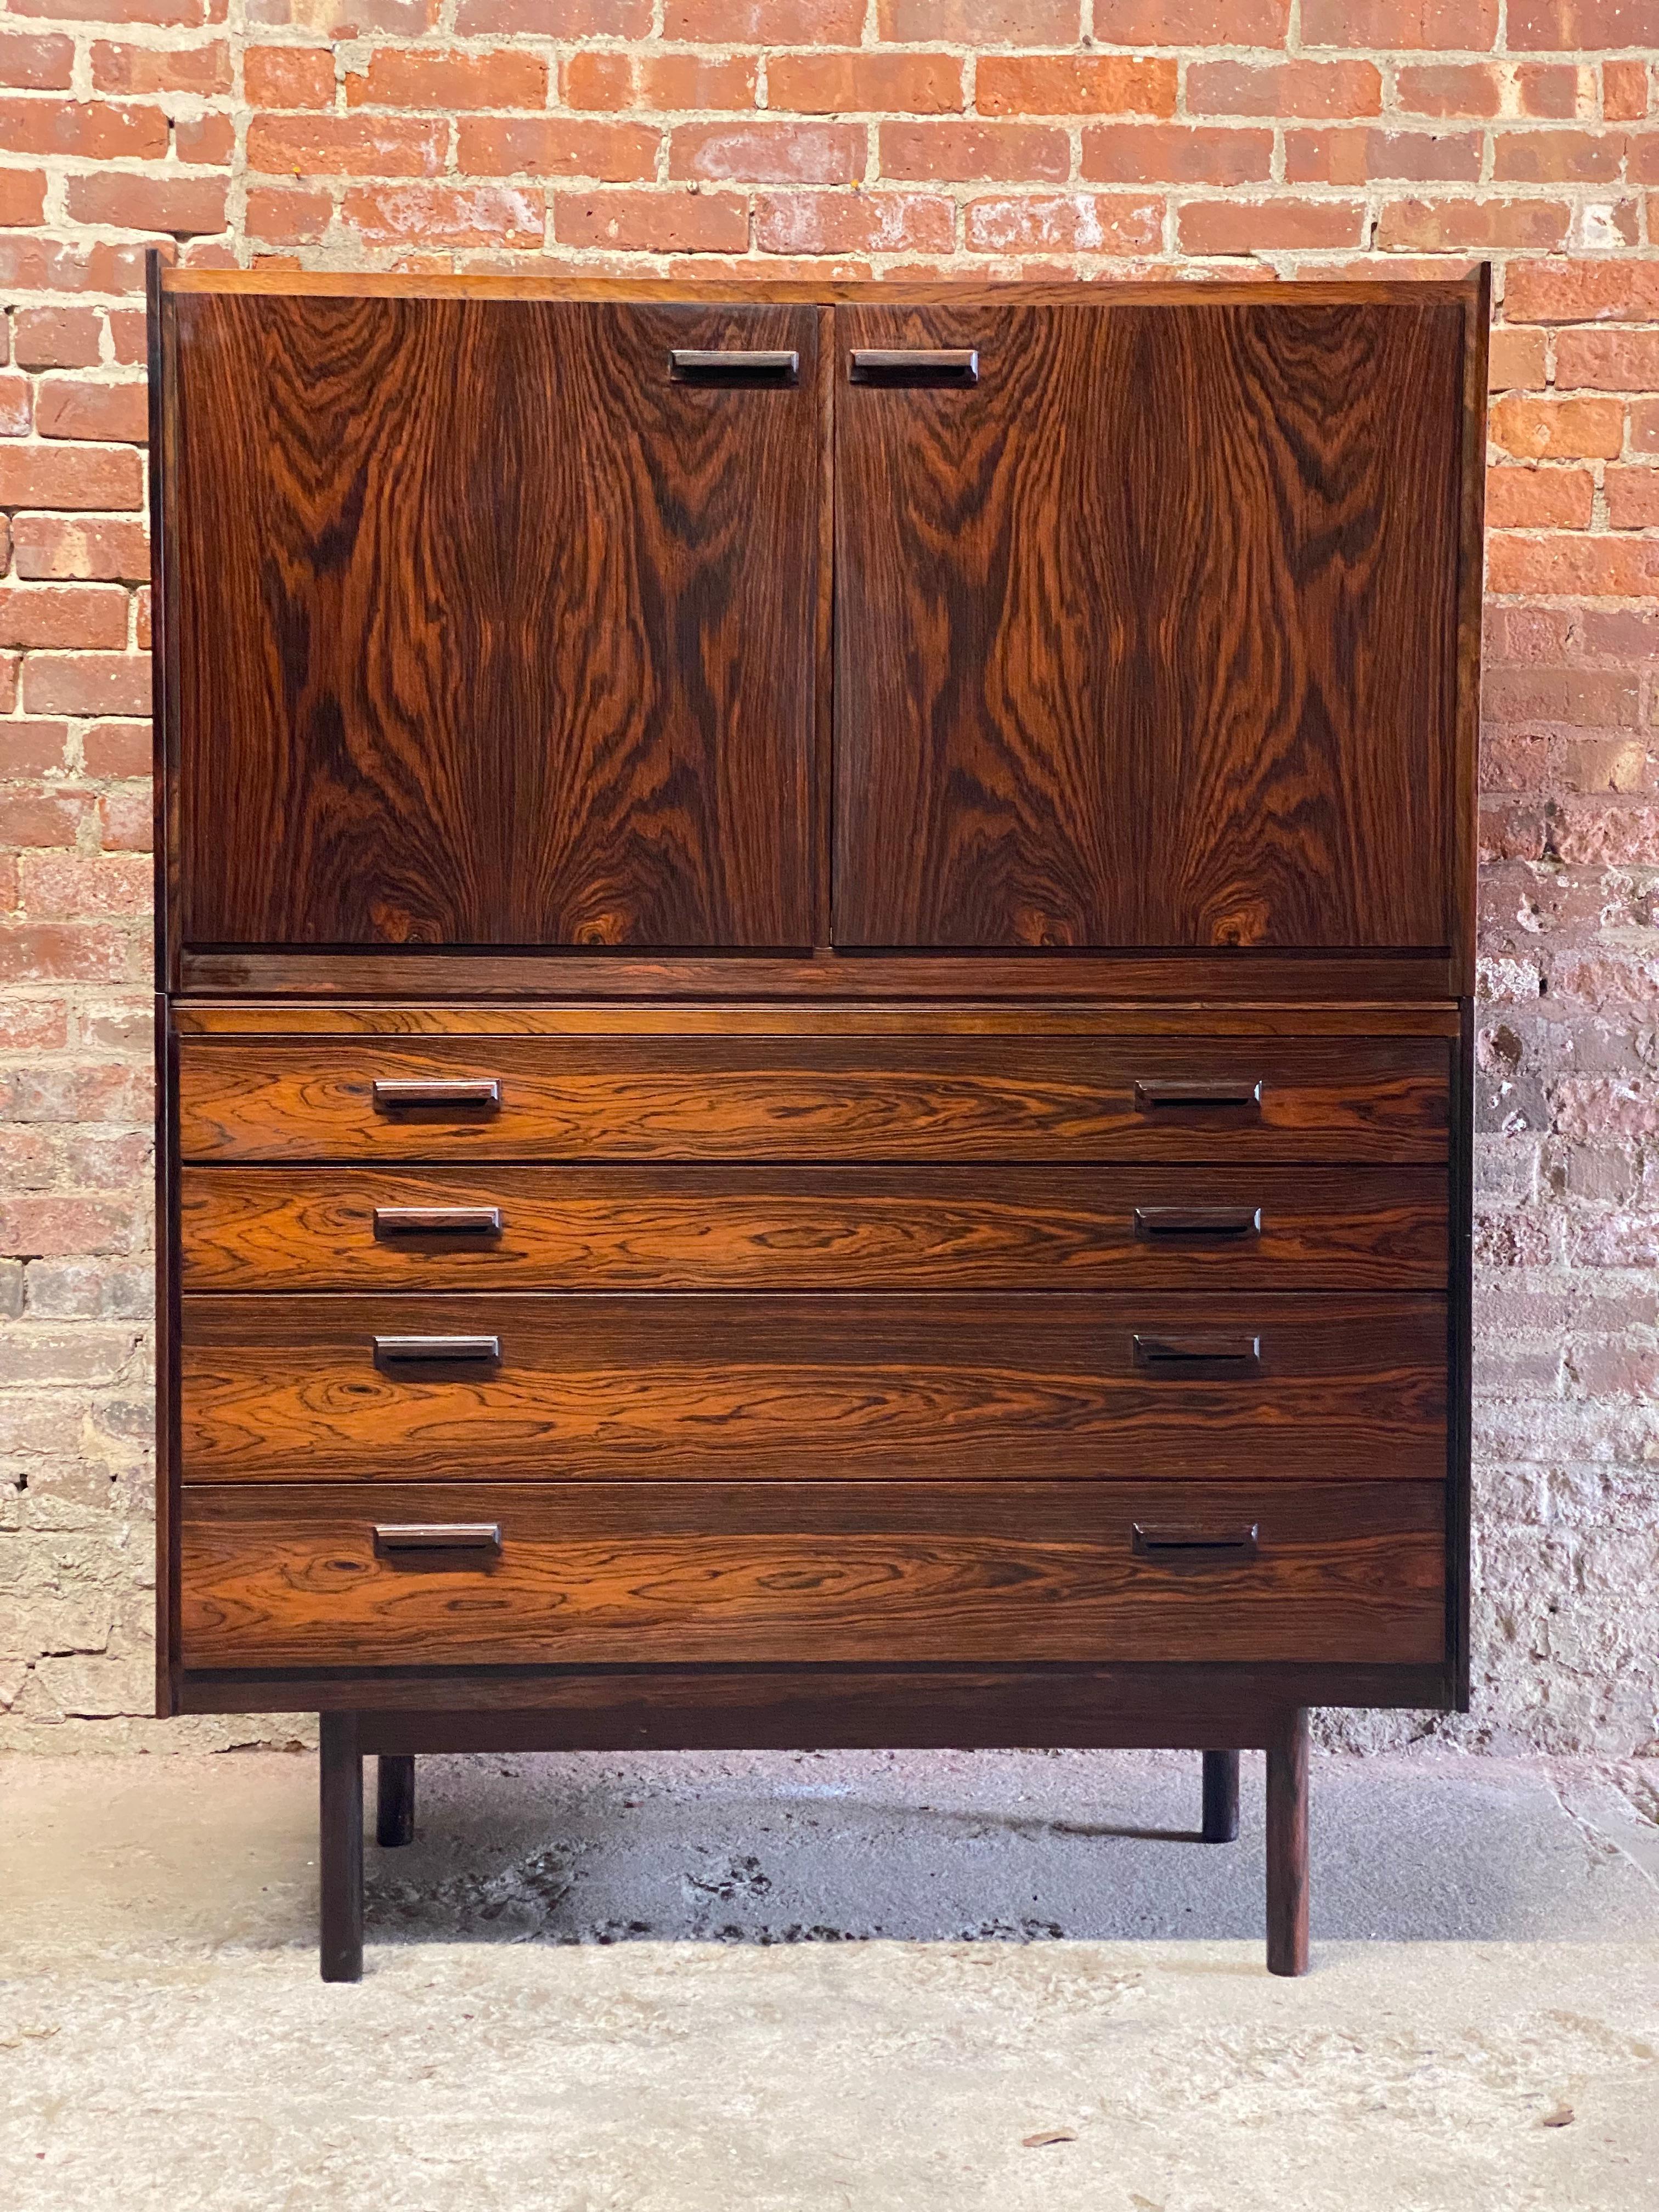 Danish Modern two piece high boy dresser cabinet. Circa 1965. Four deep drawer base on solid dowel legs supporting a two door cabinet with two adjustable shelves and felt lined drawers. Birch or Spruce lined drawers, interior and shelves. Solid